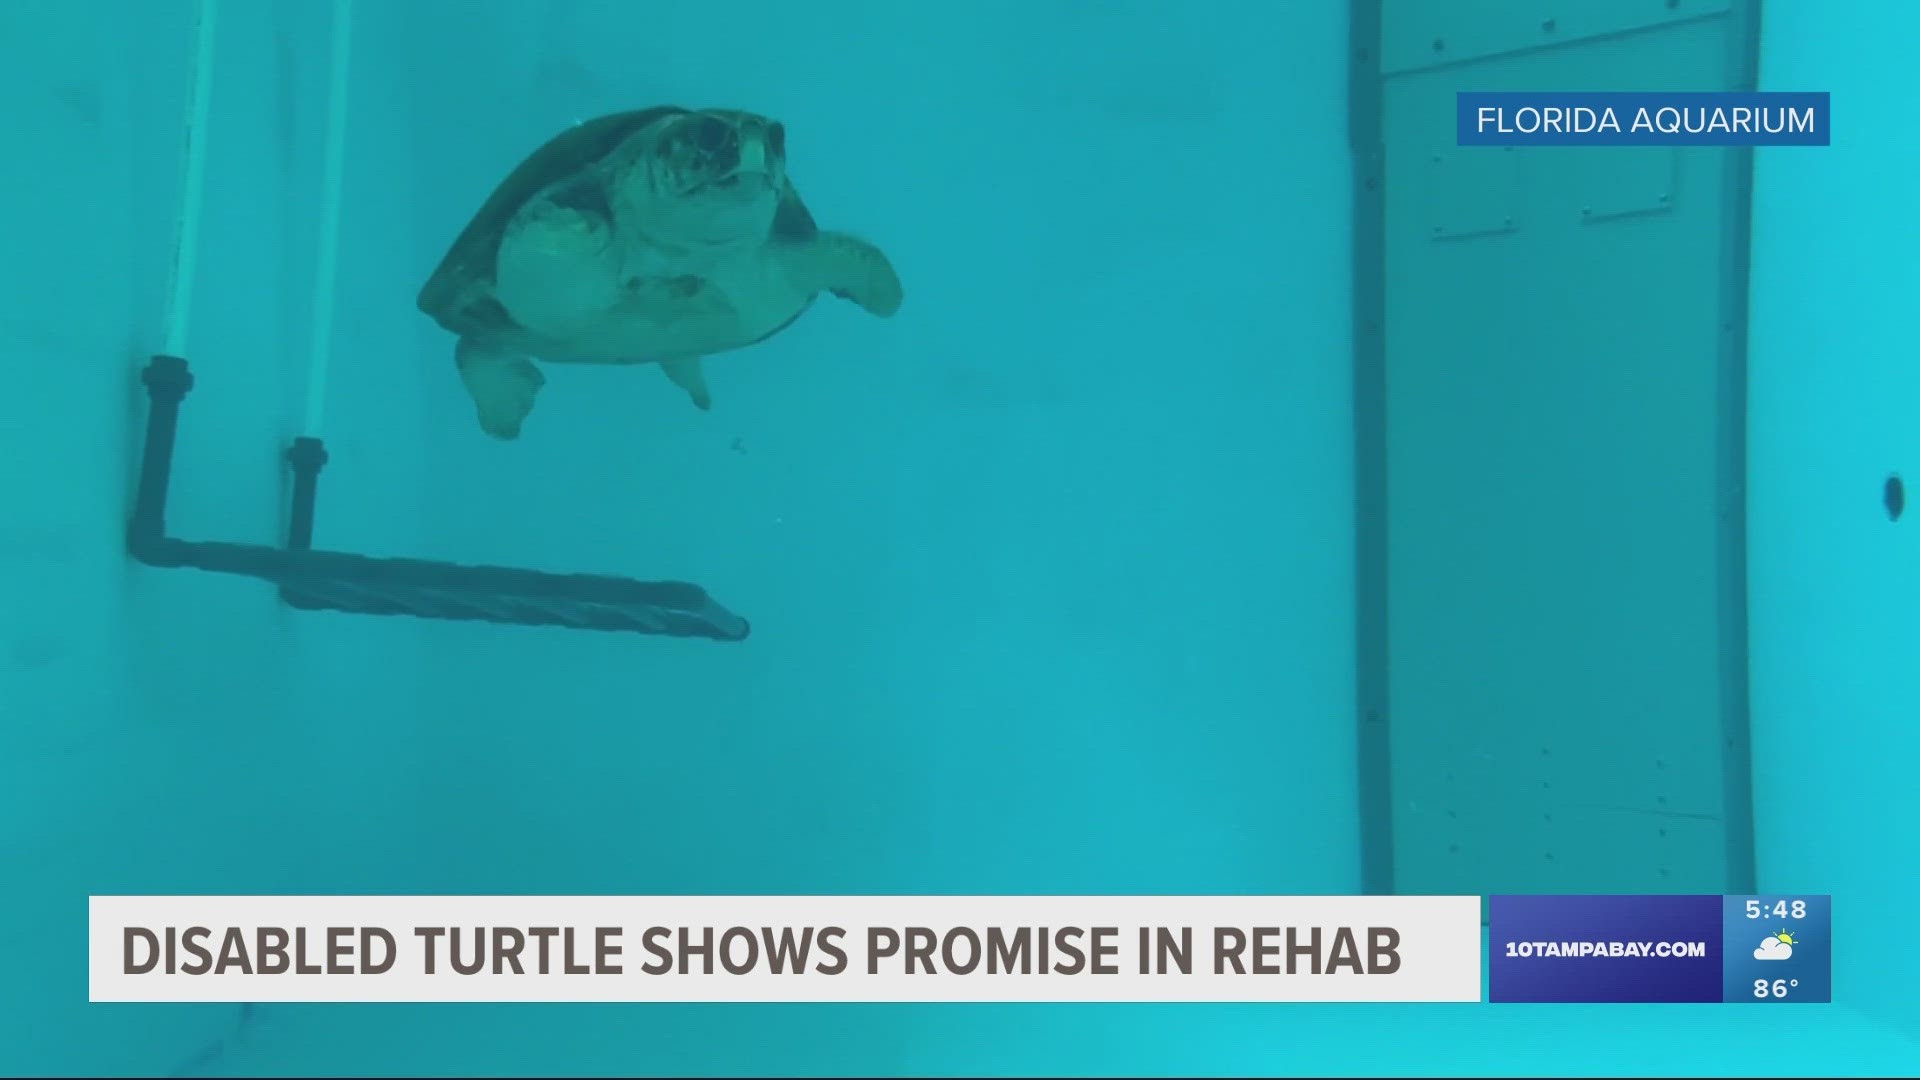 The 262-pound loggerhead turtle has been adapting to deep-water swimming despite missing 2 flippers.